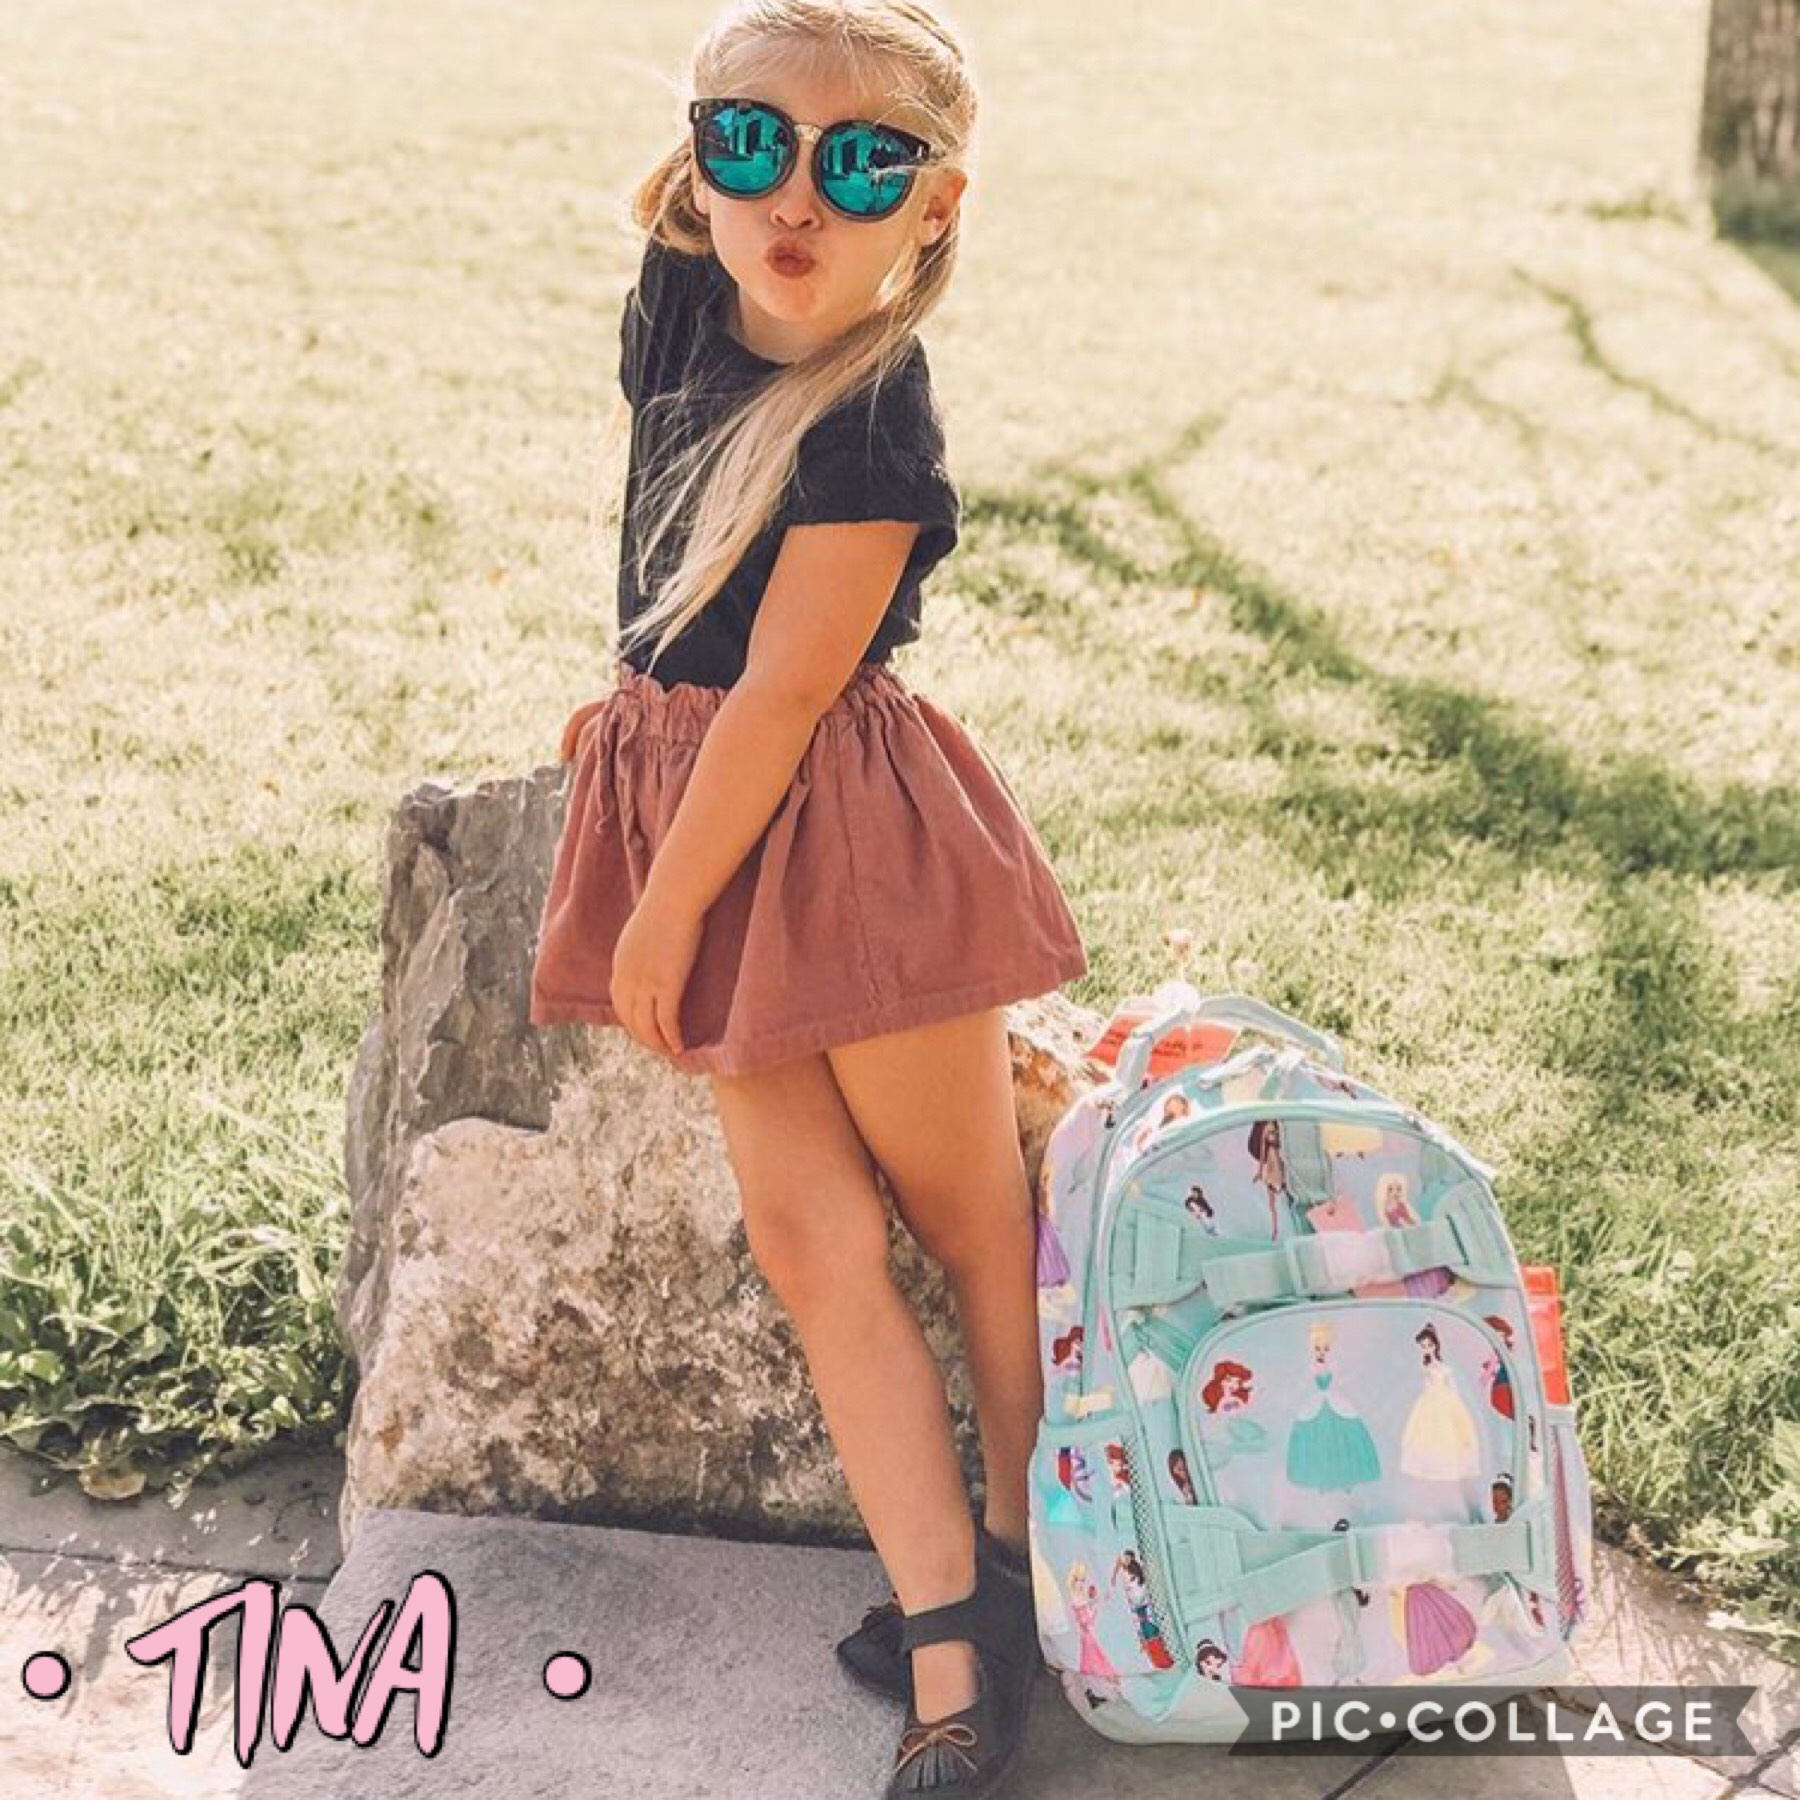 • Tap for Bio • 
- Tina Lily Ortega 
- 4 years old 
- mommy is Maleah 
- Love my brother and sisters 💗
- loves to play princess 👑 